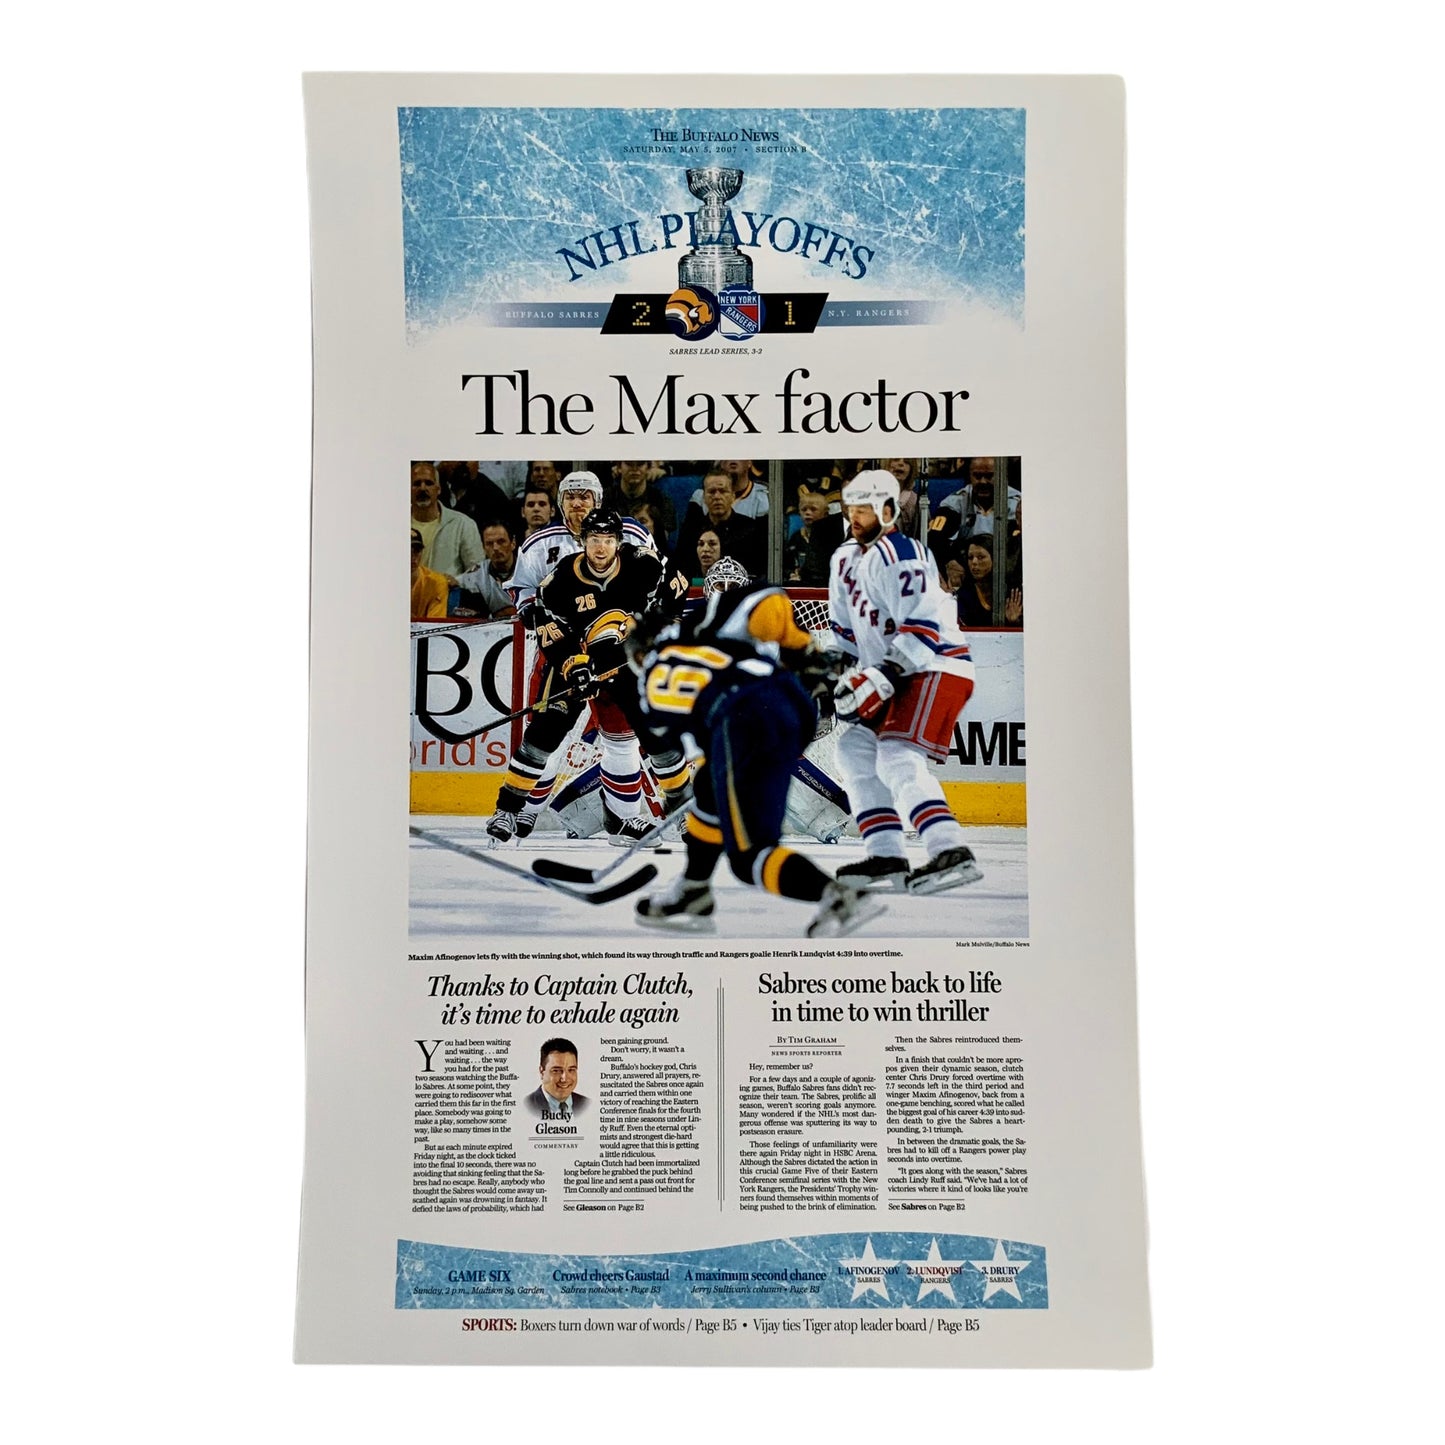 The Max Factor - May 5, 2007 Sports Page Poster